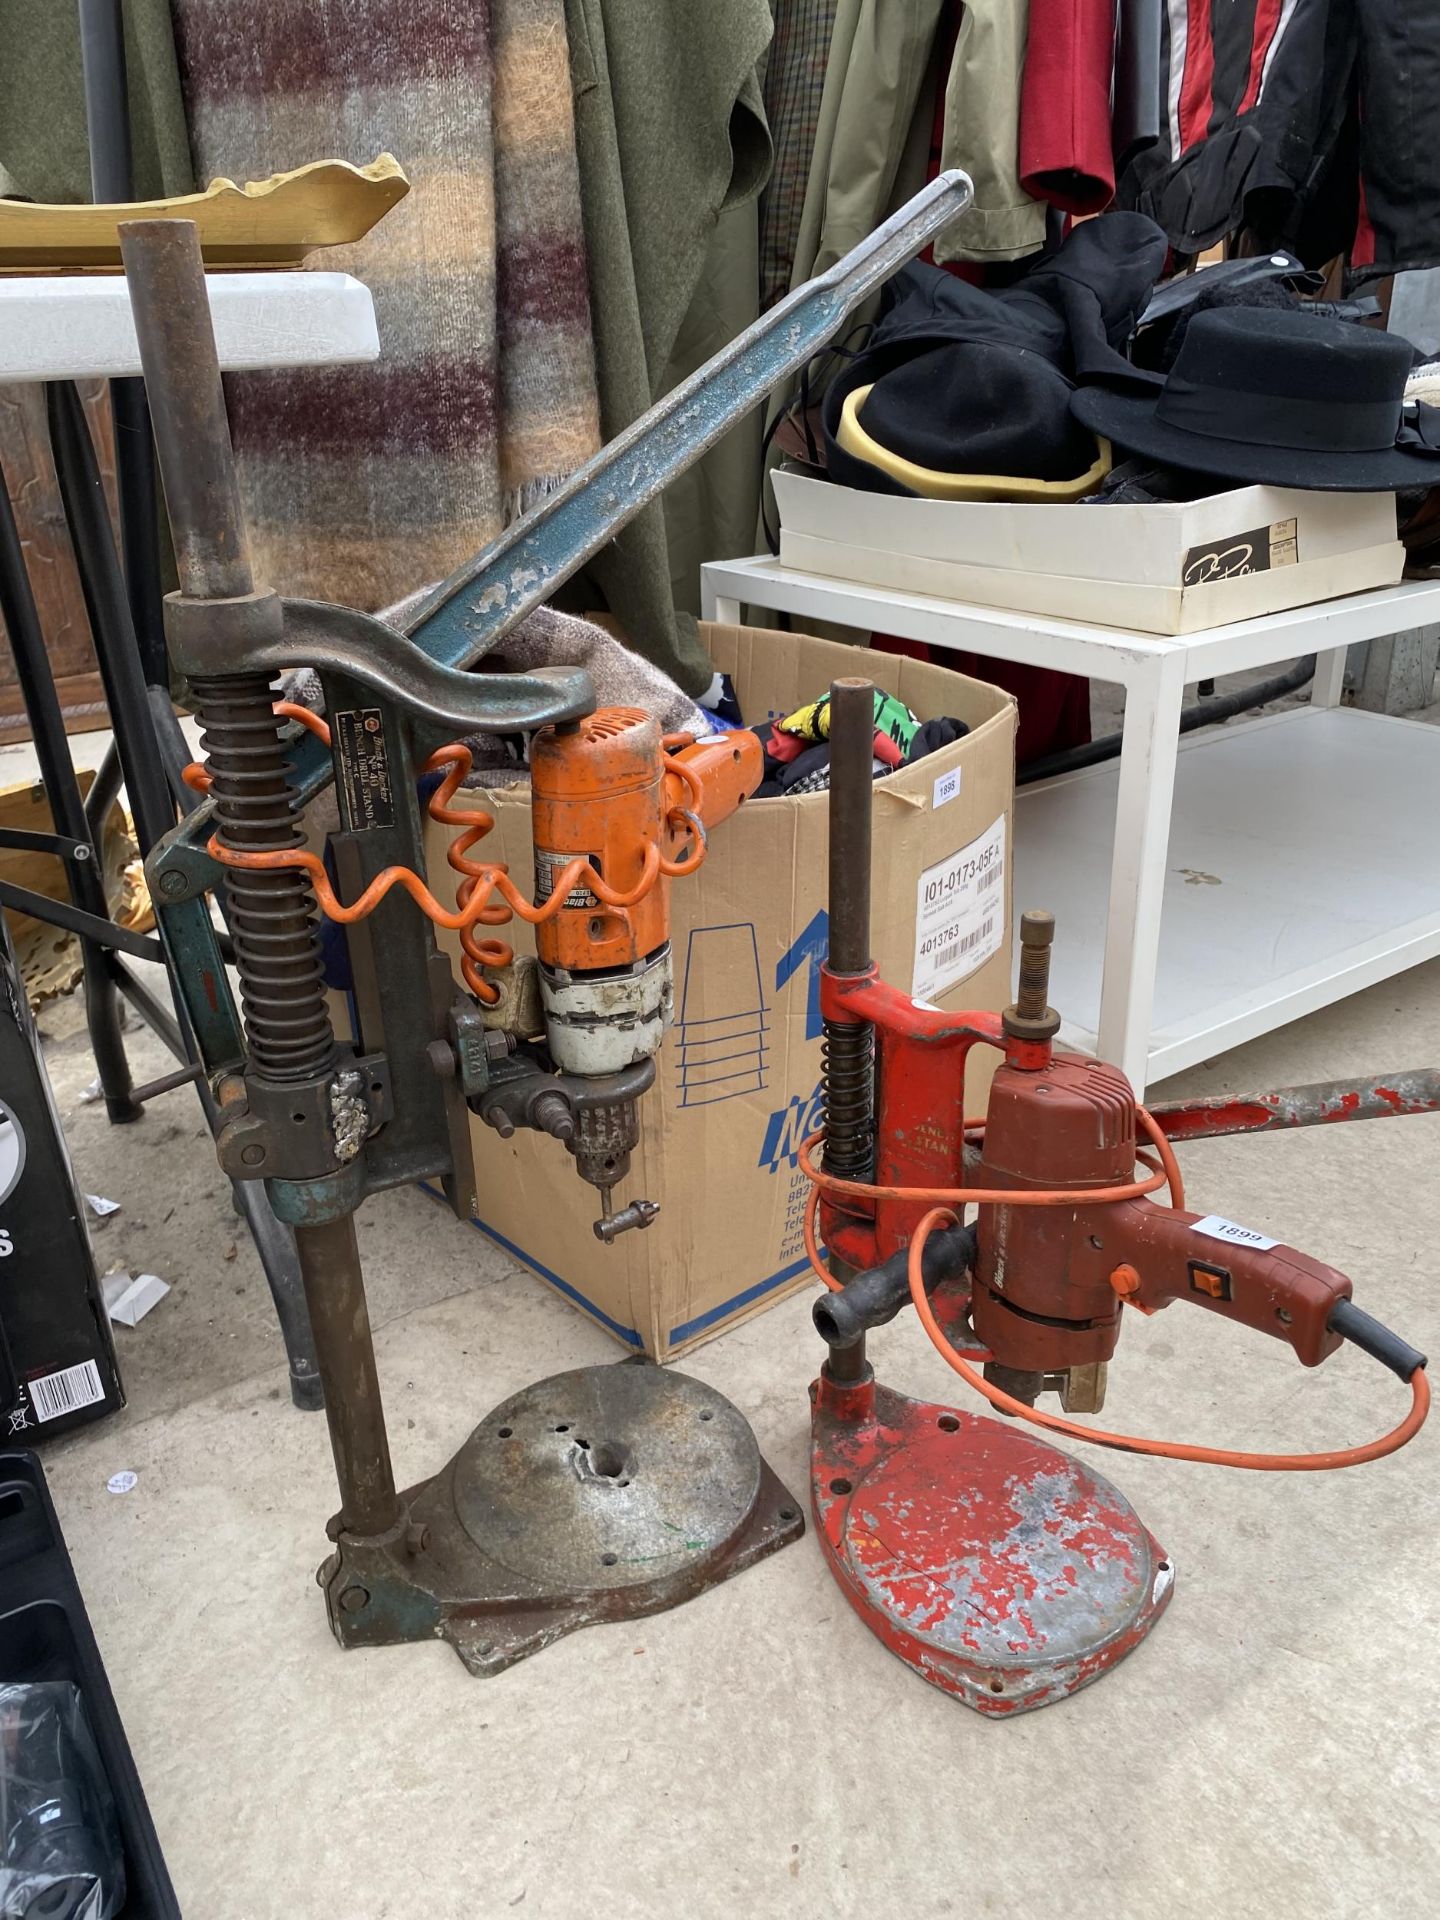 TWO DRILL STANDS AND ELECTRIC DRILLS